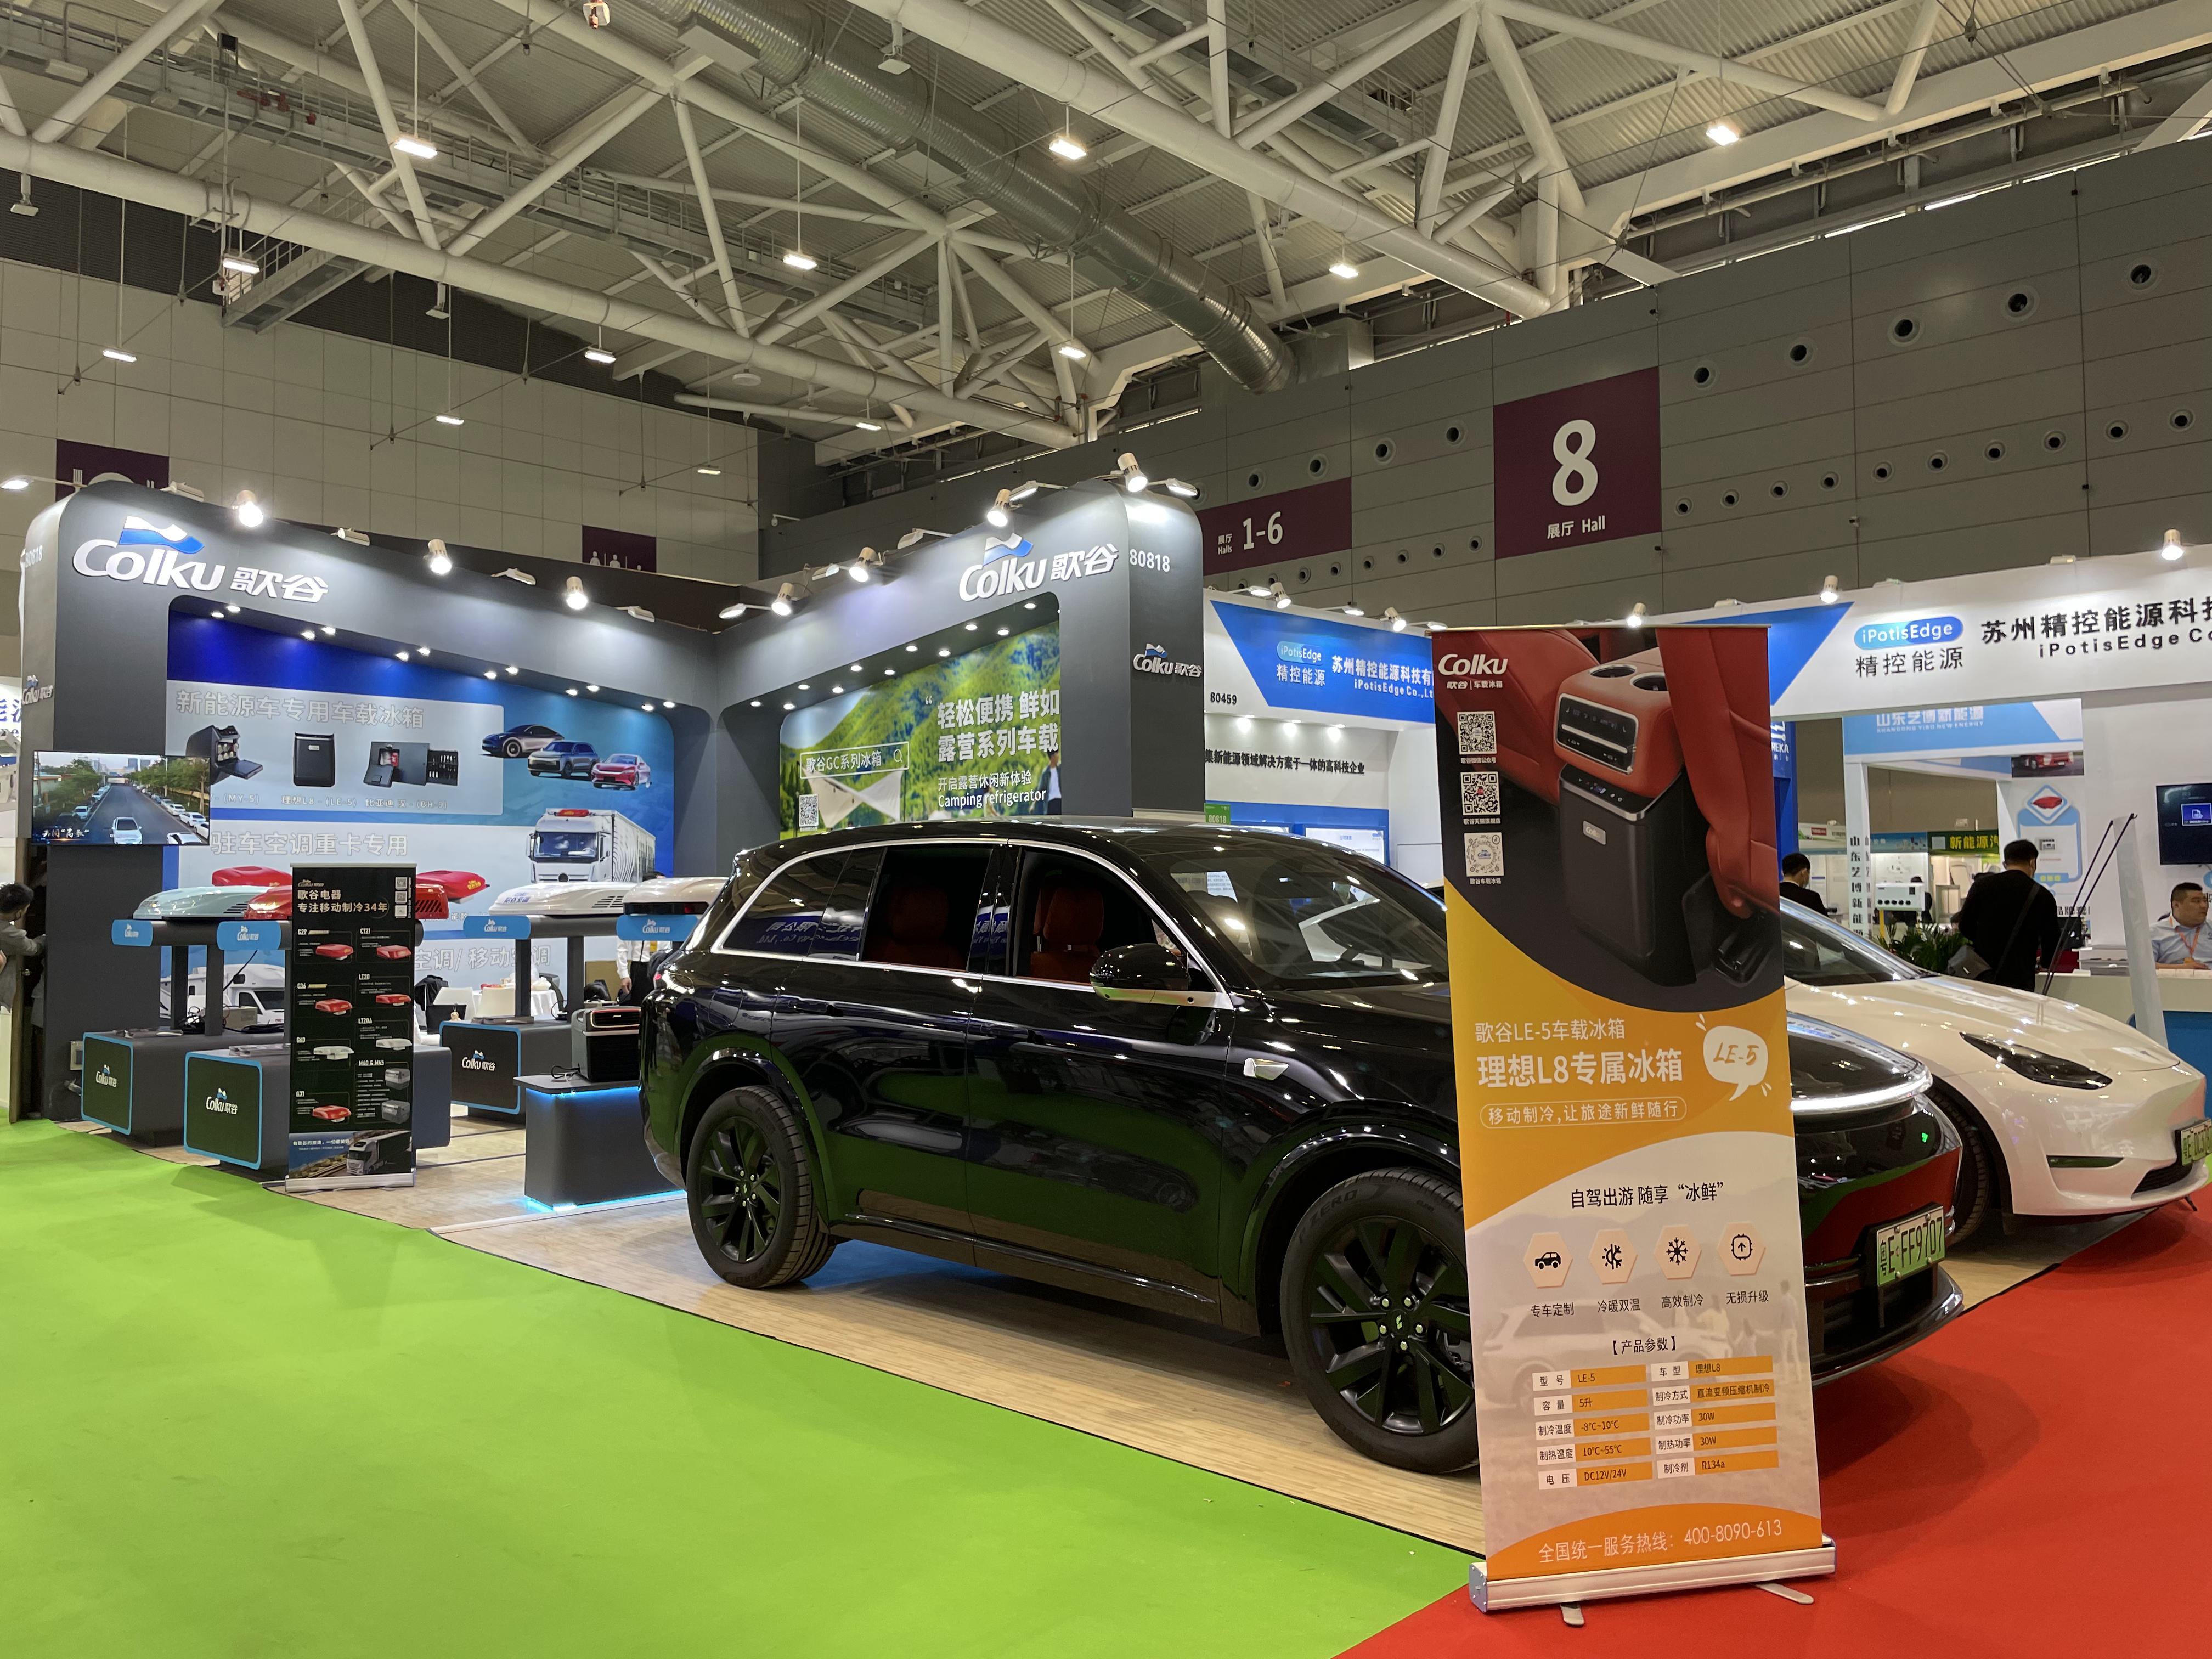 Colku company appeared in the 22nd/23rd Shenzhen International Smart Travel, Automobile Modification and Automobile Service Industry Ecological Expo